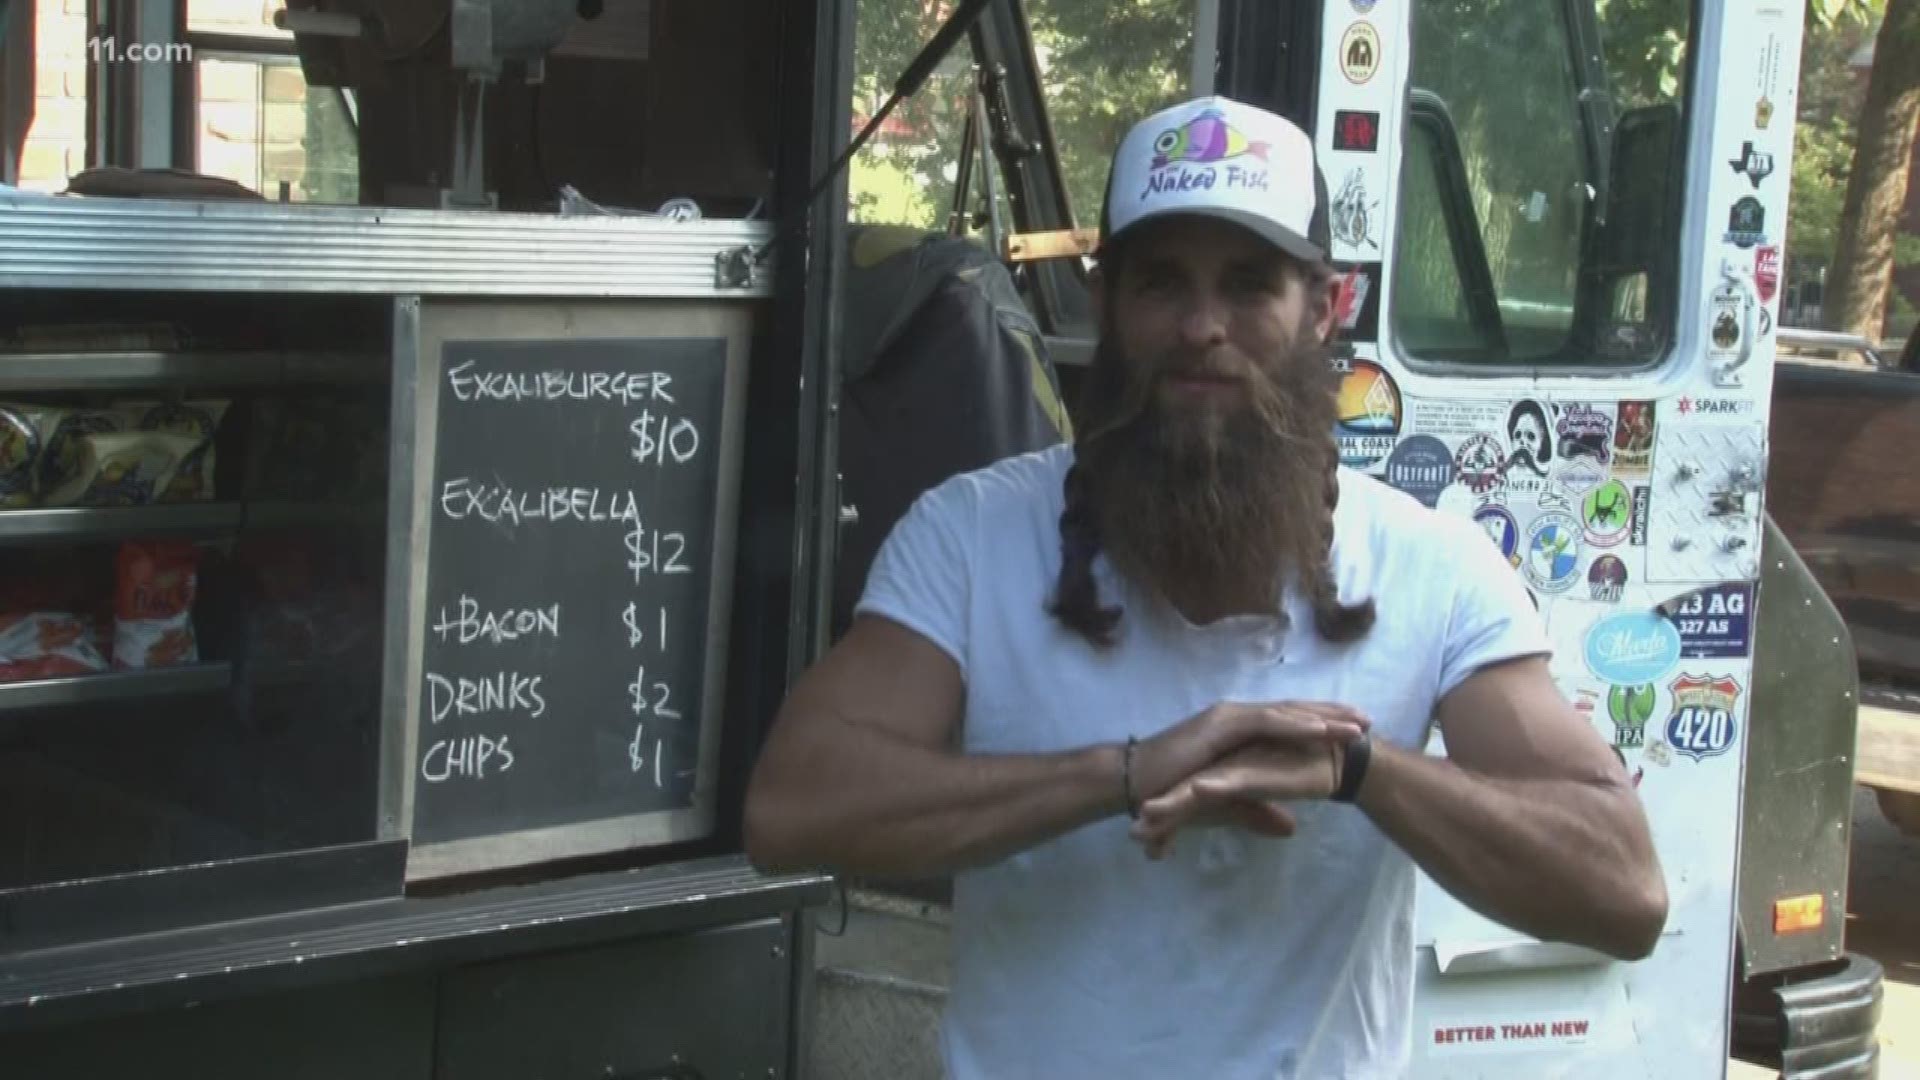 Kyle Pounders started his food truck business "Excaliburger" three years ago. He was traveling the country and serving burgers, but now he needs your help to feed victims of Hurricane Florence.